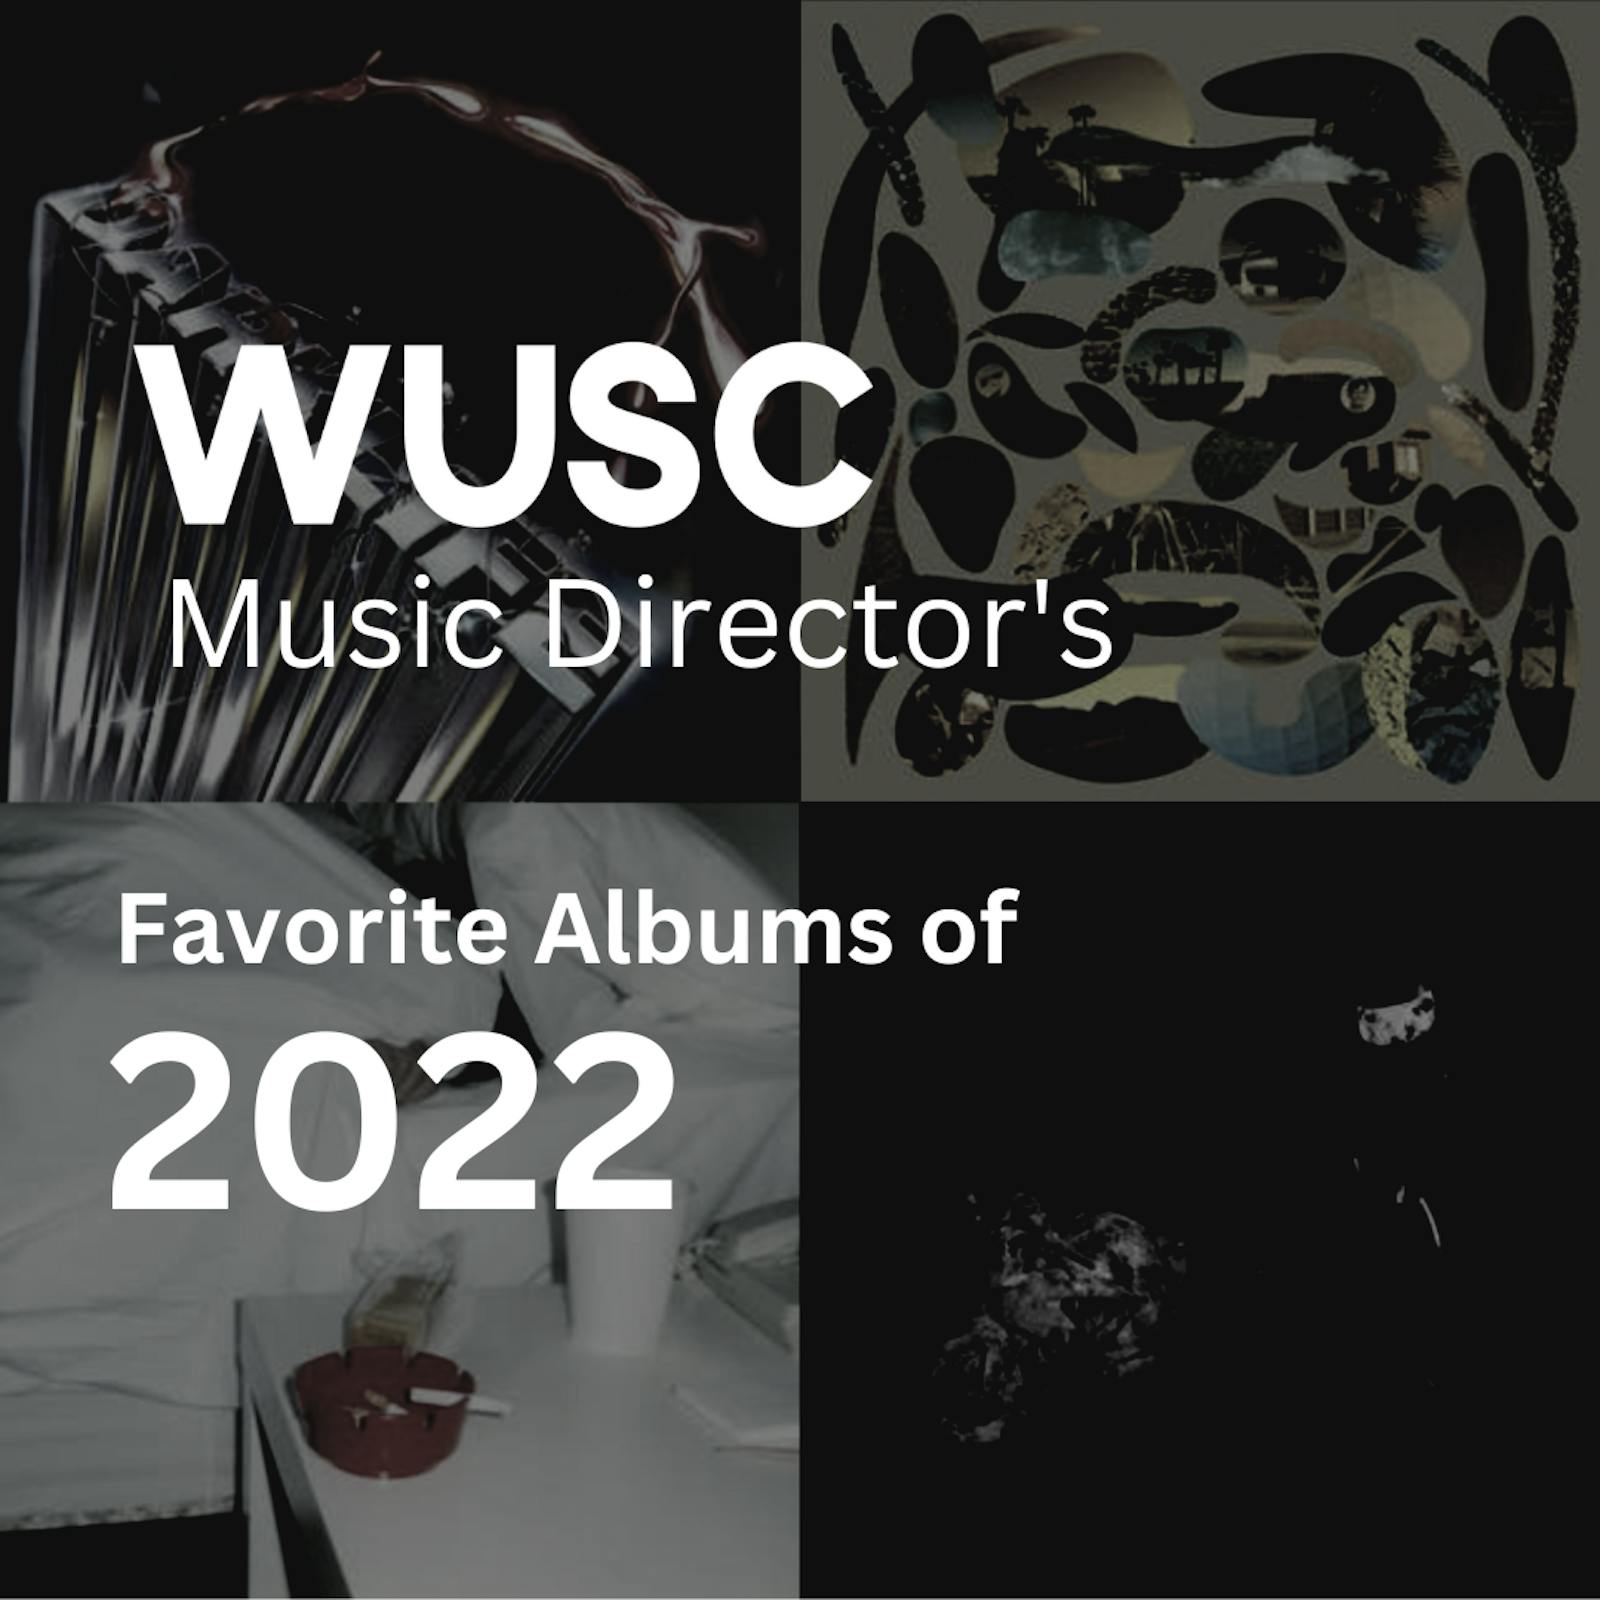 WUSC Music Director's Favorite Albums of 2022 - WUSC 90.5 FM and